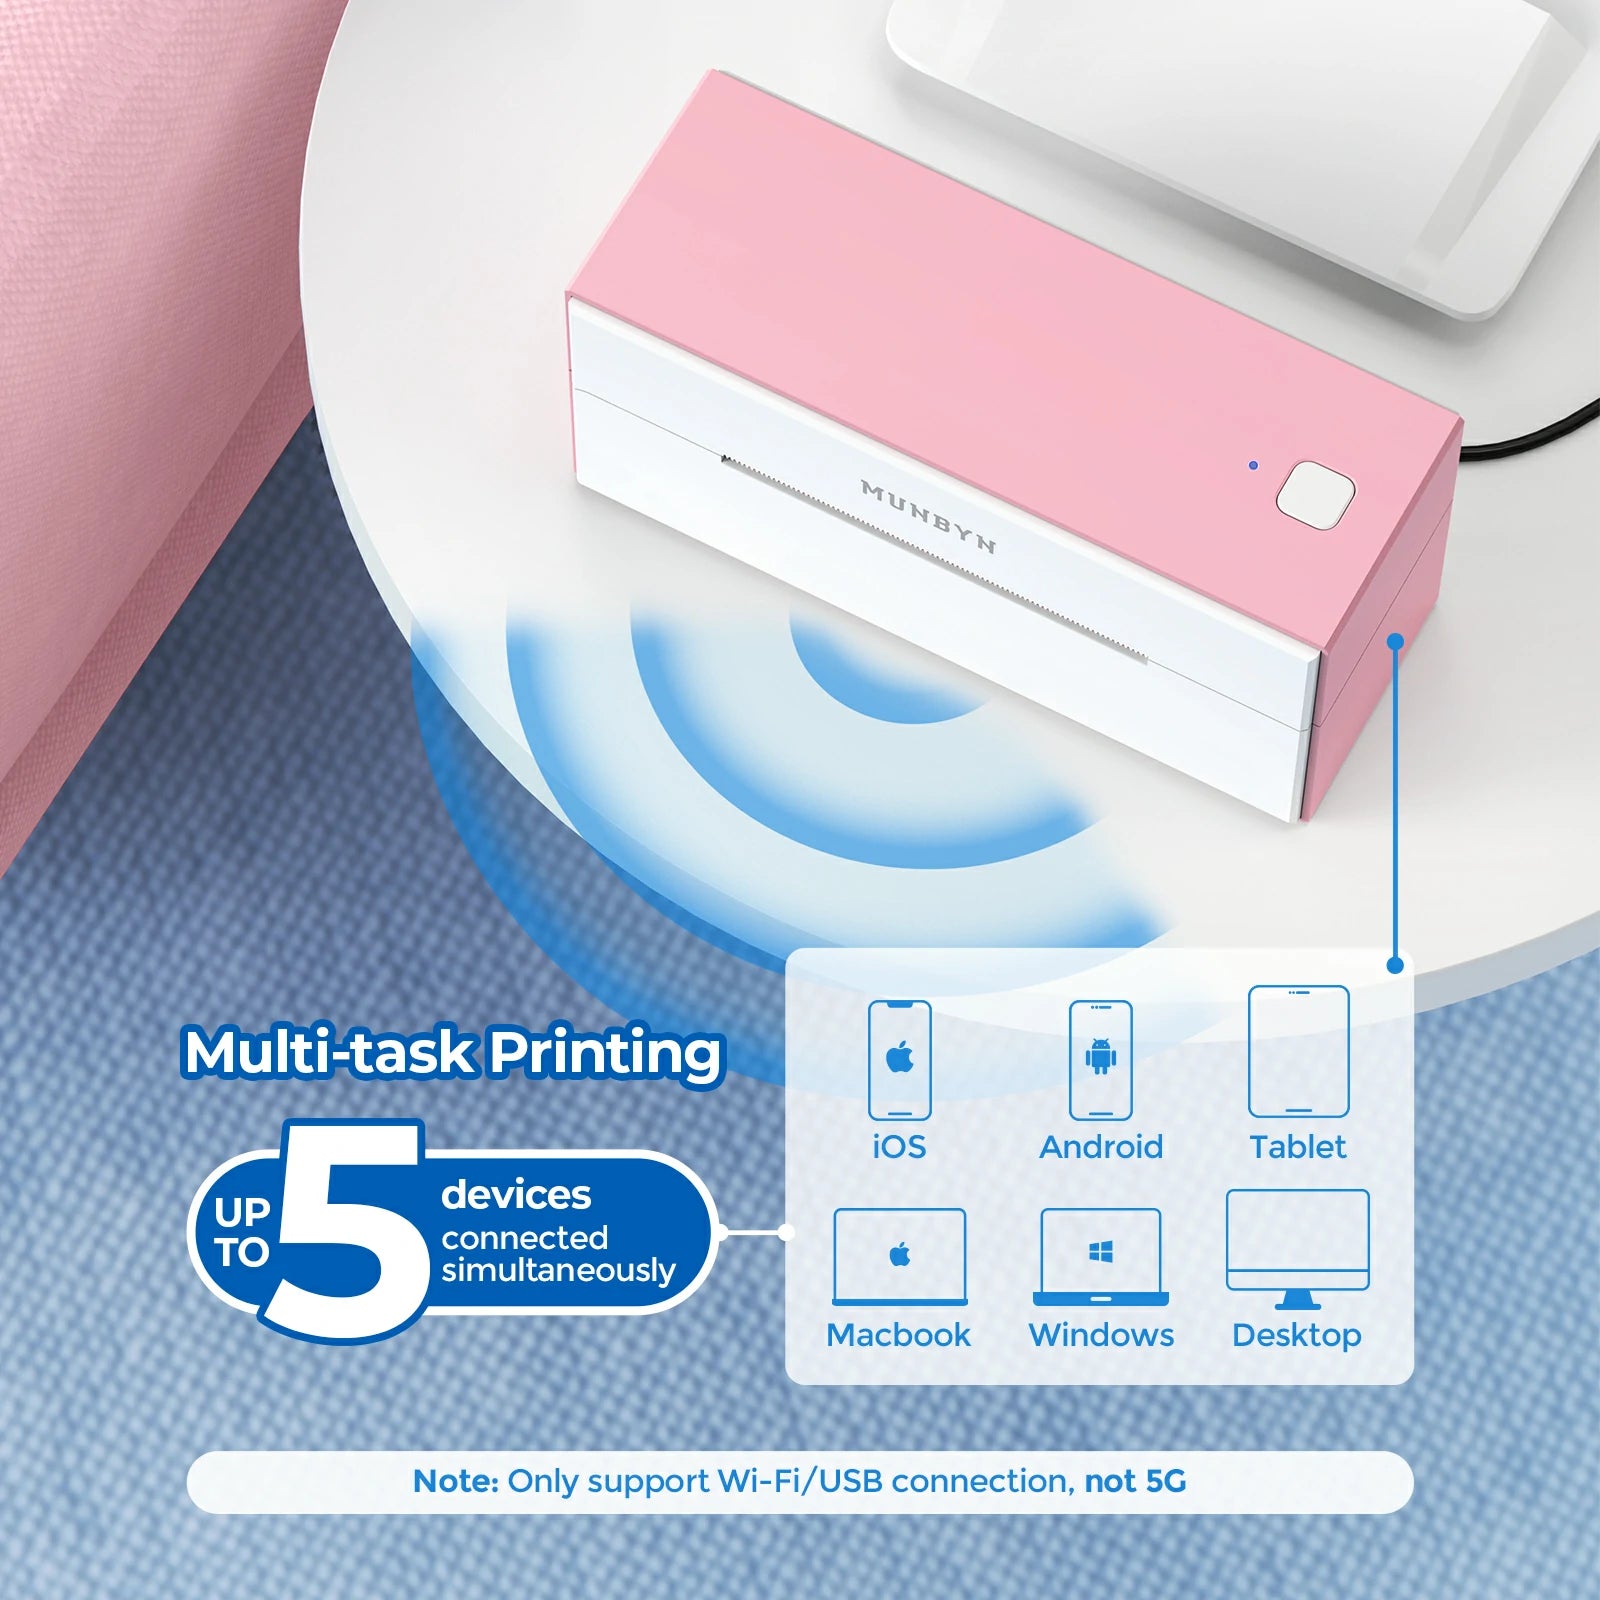 MUNBYN P129S thermal printer features seamless WiFi connectivity, allowing for effortless wireless printing from 5 devices within your network.